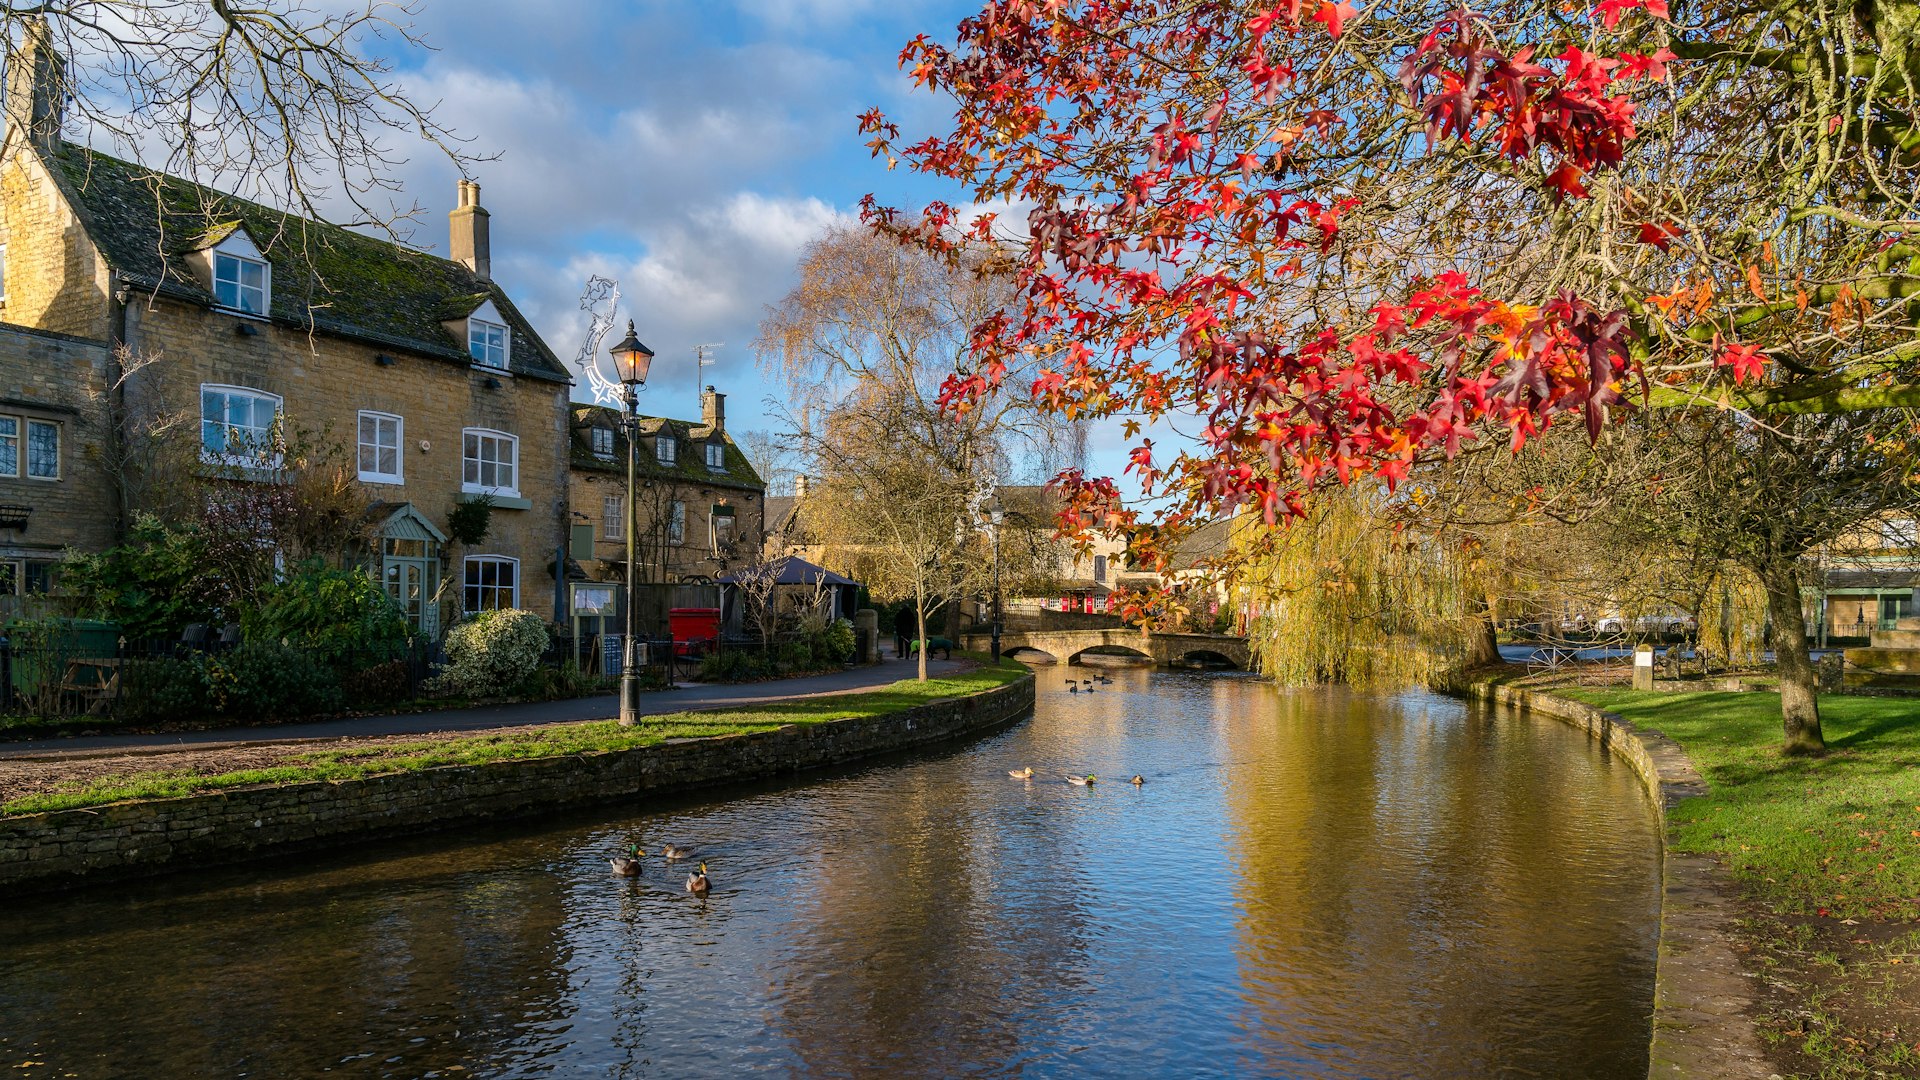 A river meanders past a honey-coloured stone house on one side and a tree bright with red autumnal; leaves on the other.